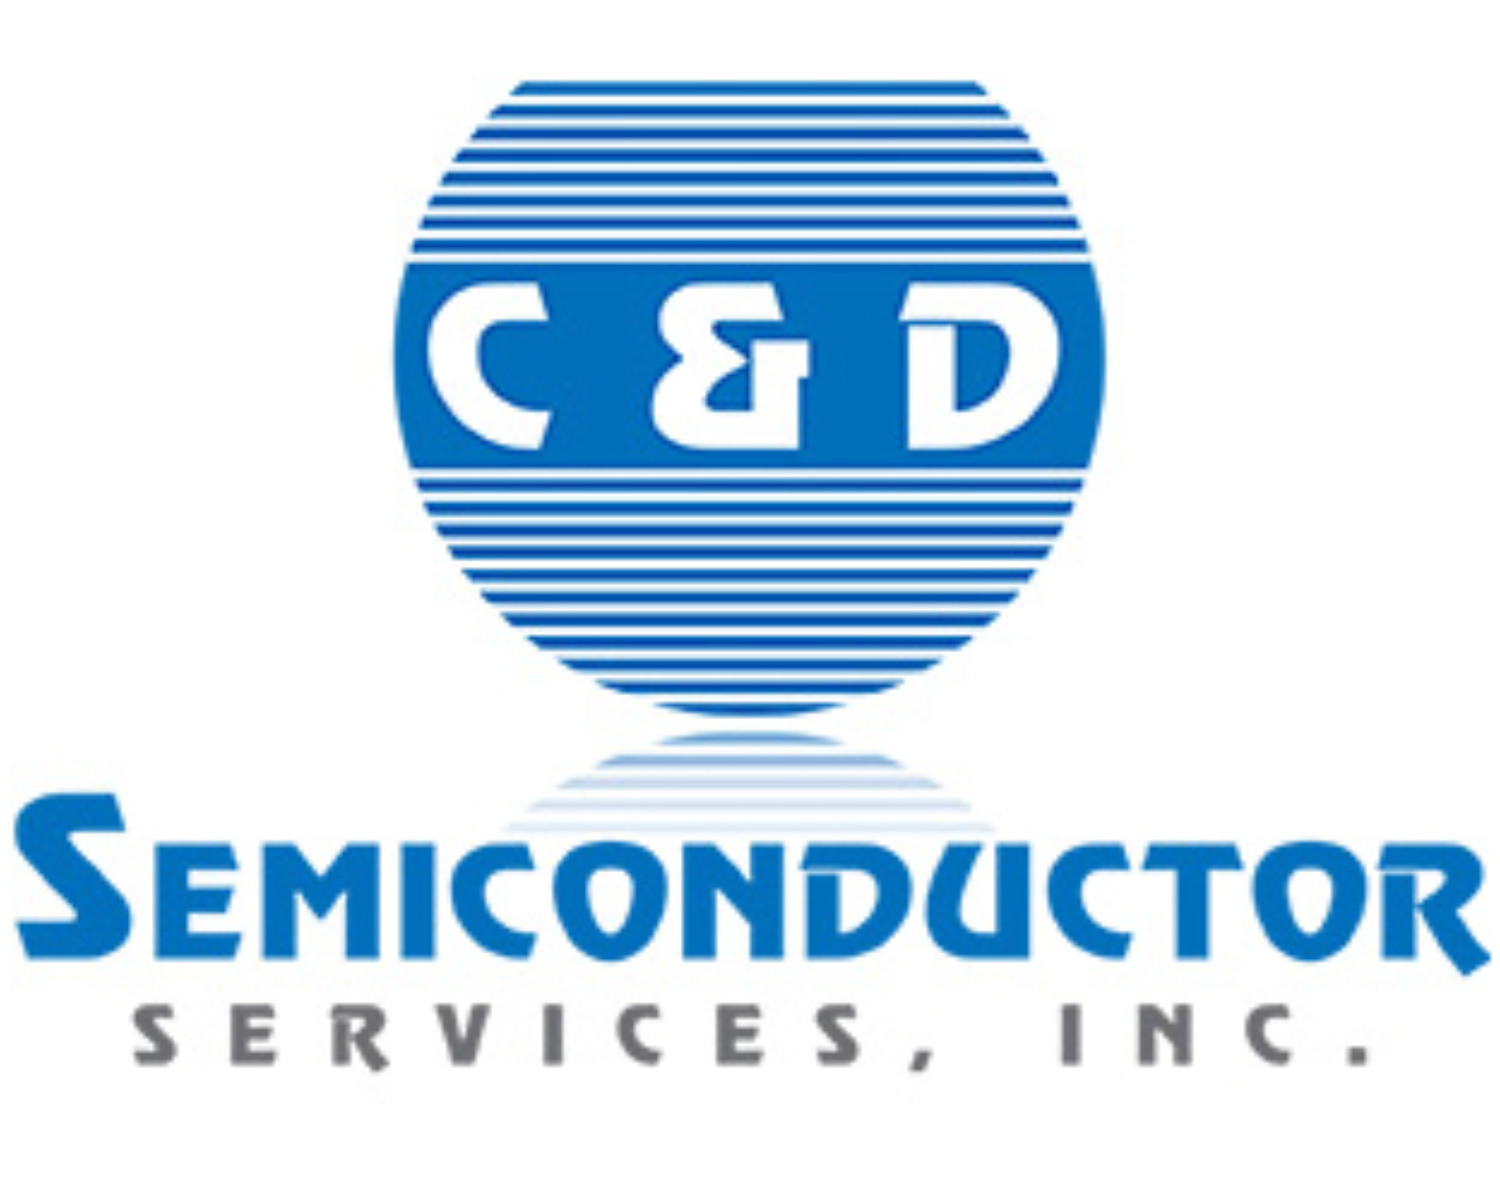 C&D Semiconductor